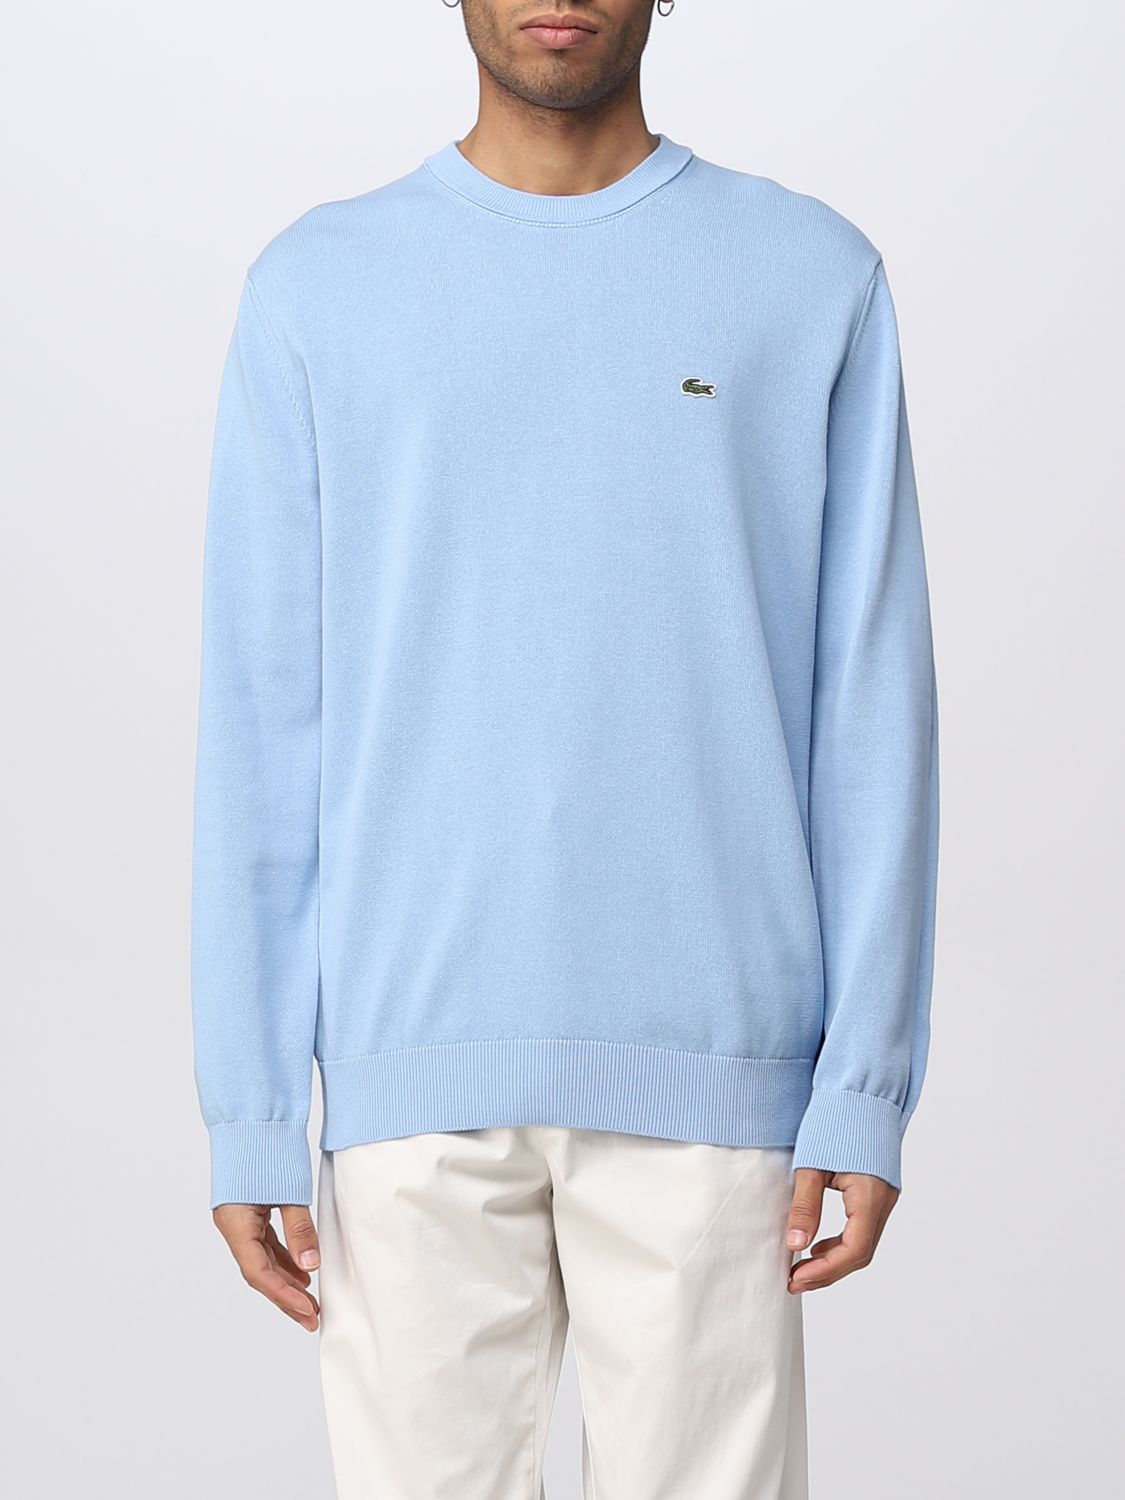 LACOSTE: sweater for man - Gnawed Blue | Lacoste sweater AH2193 online ...